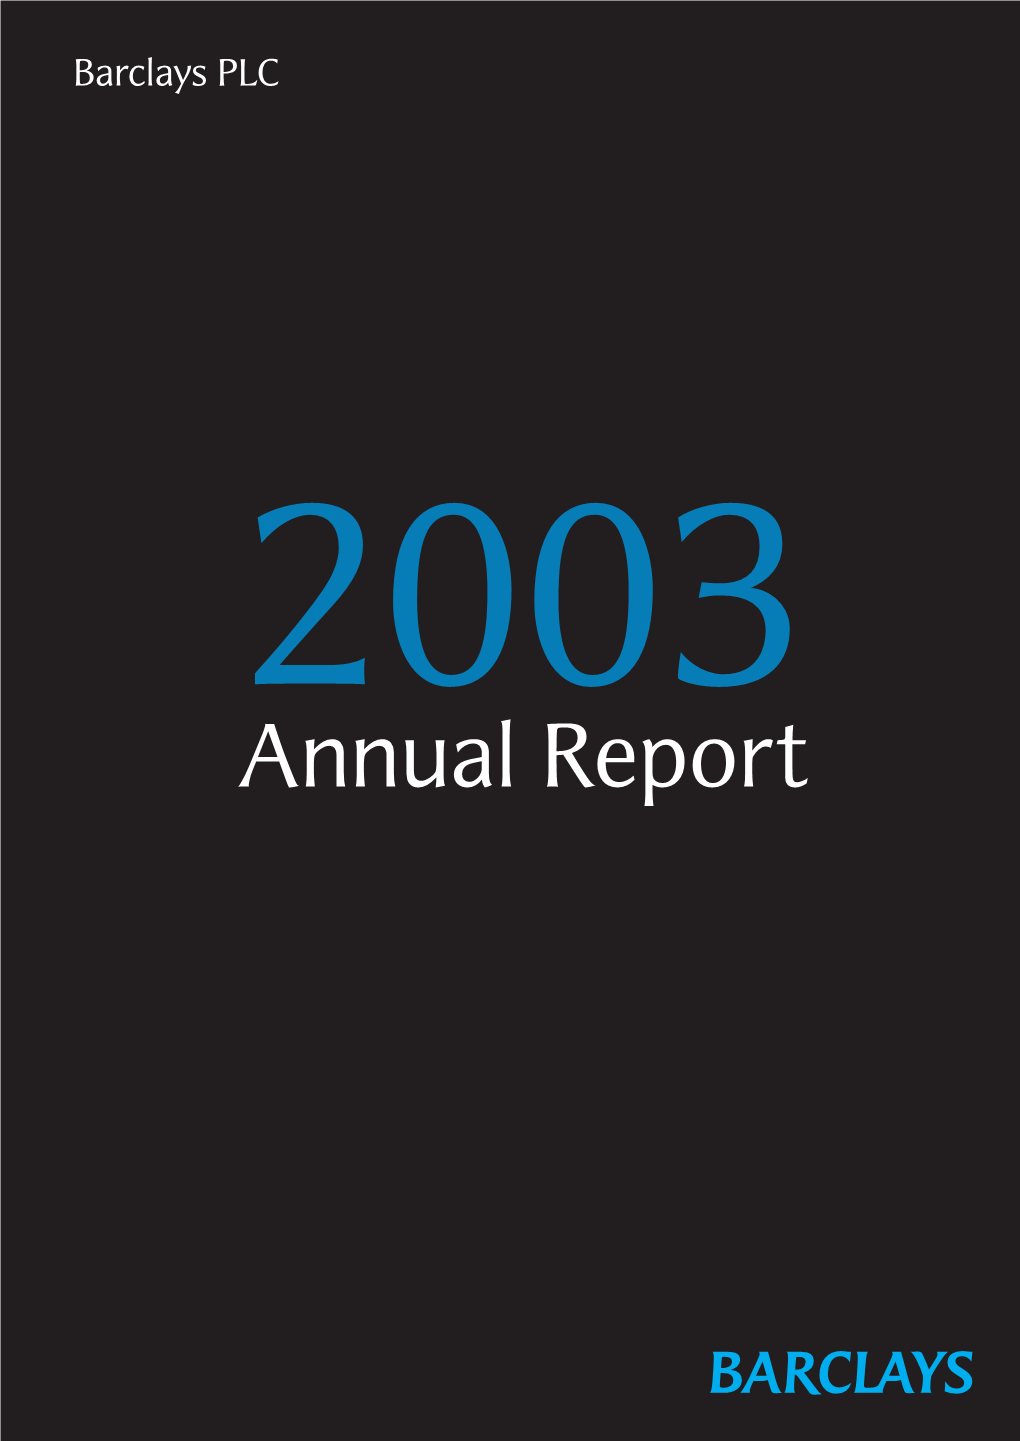 Barclays PLC Annual Report 2003